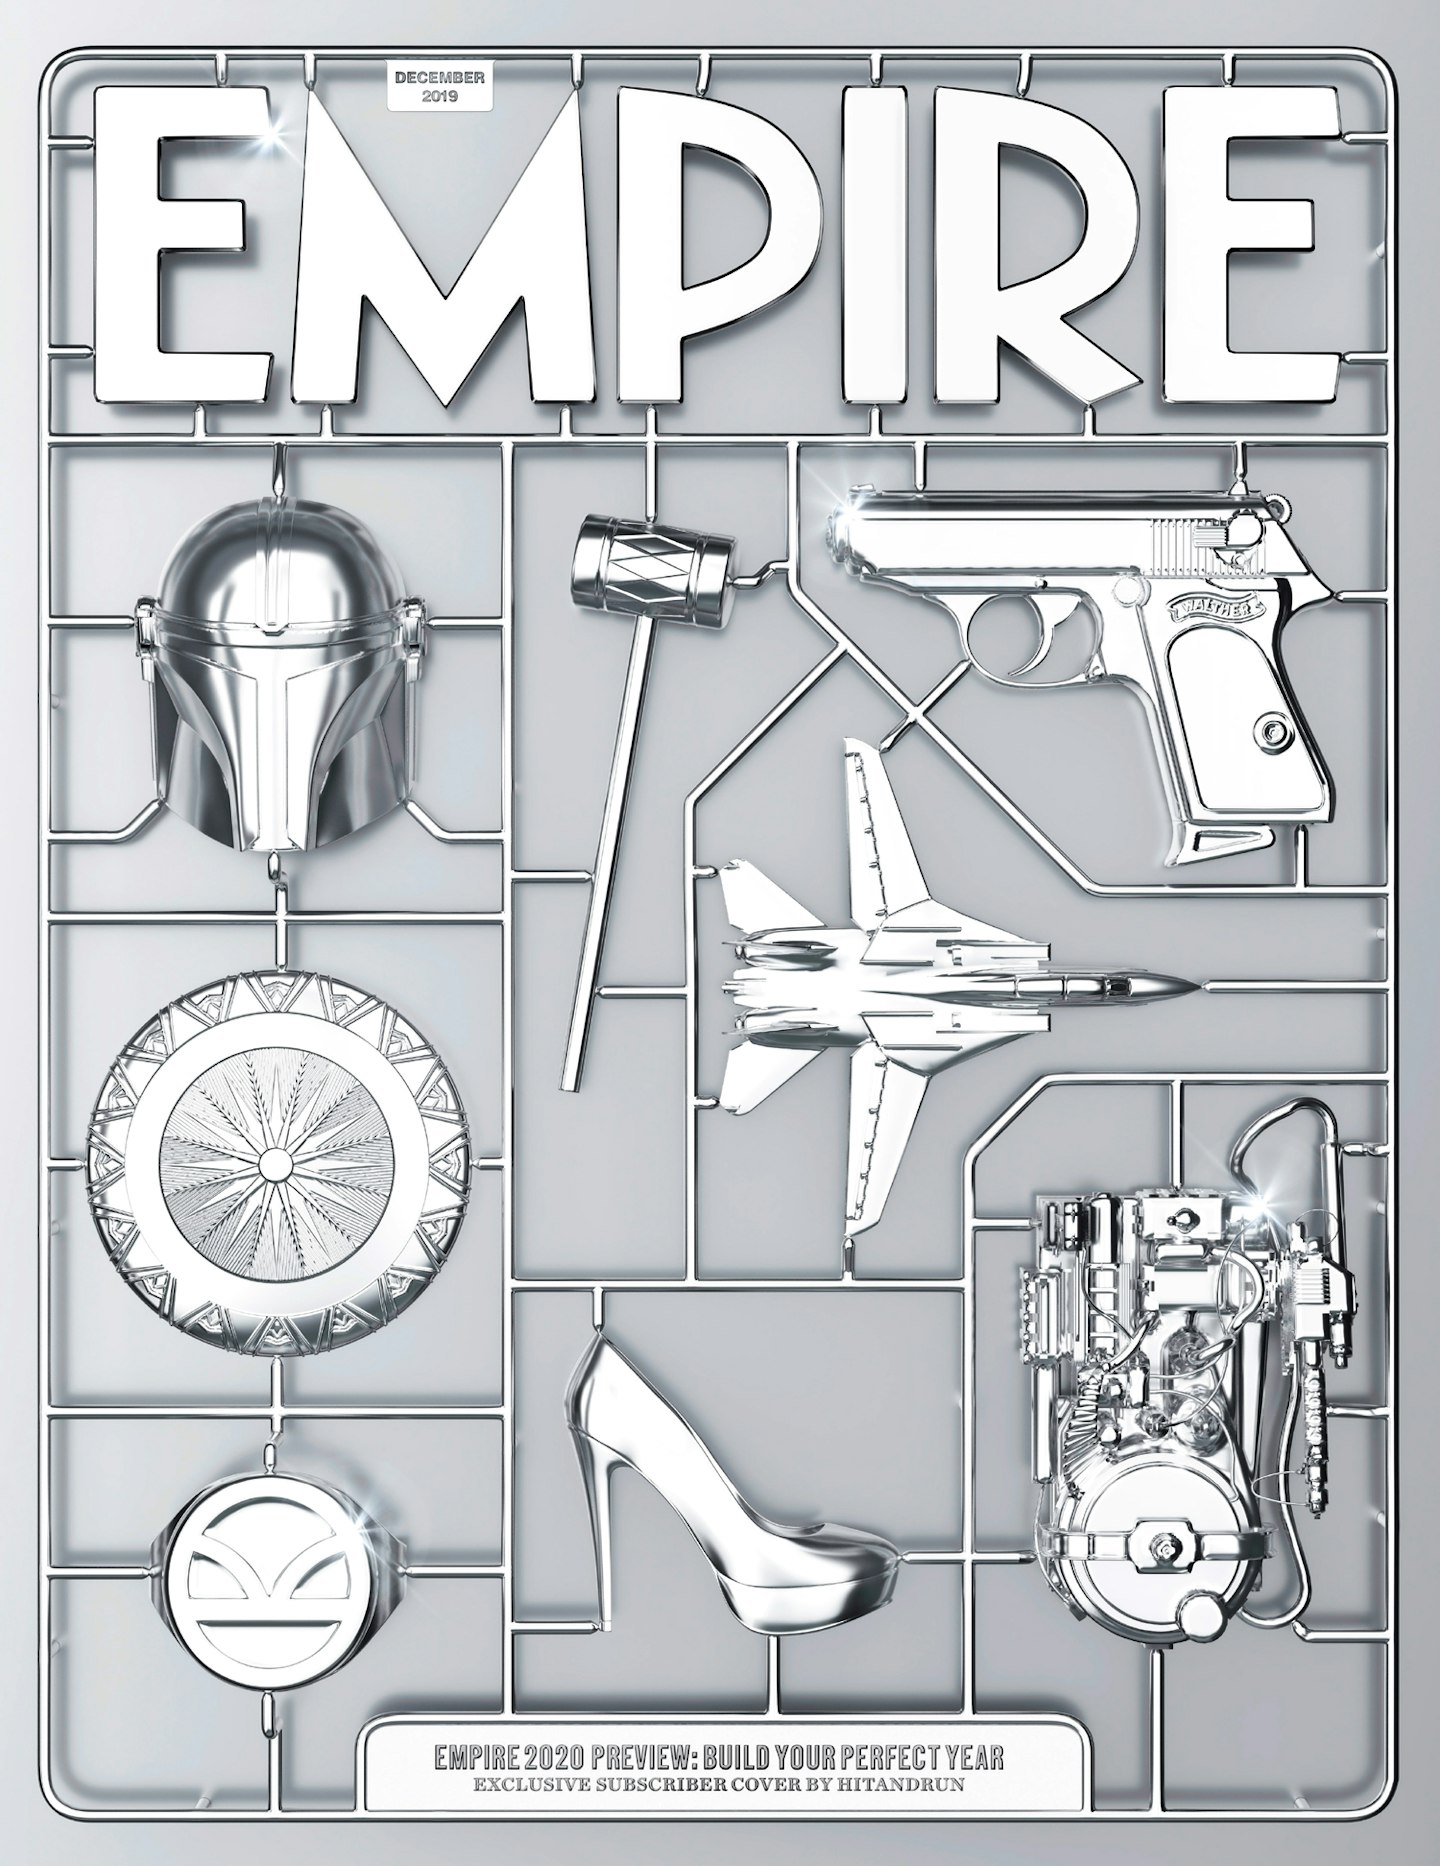 Empire – December 2019 subscriber cover – 2020 Preview Issue